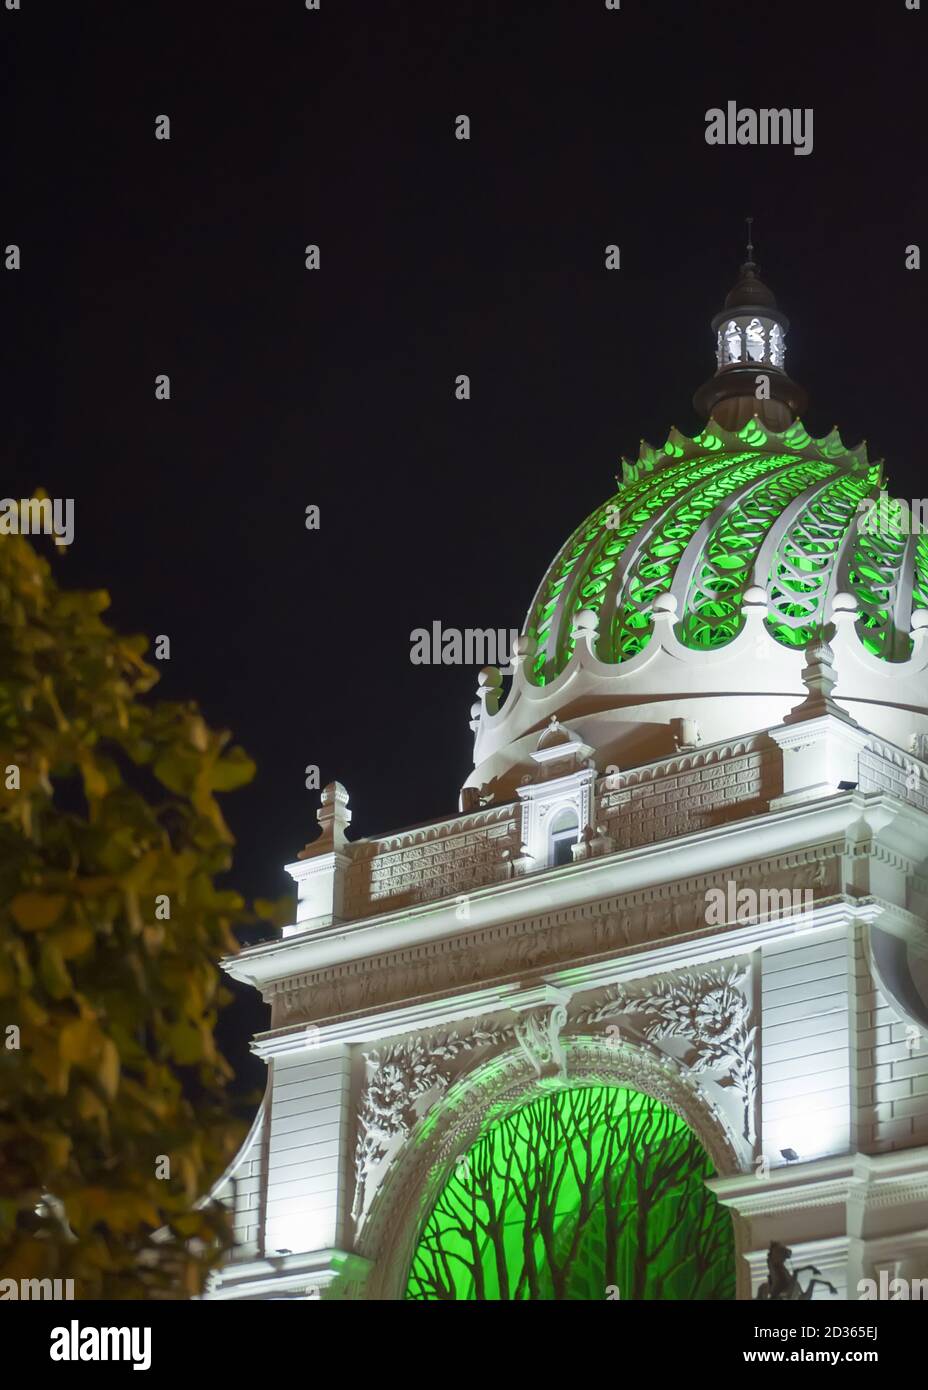 Kazan, Russia, September 17, 2020. Palace of agriculture at night. Ministry of agriculture of Tatarstan is located here. Stock Photo